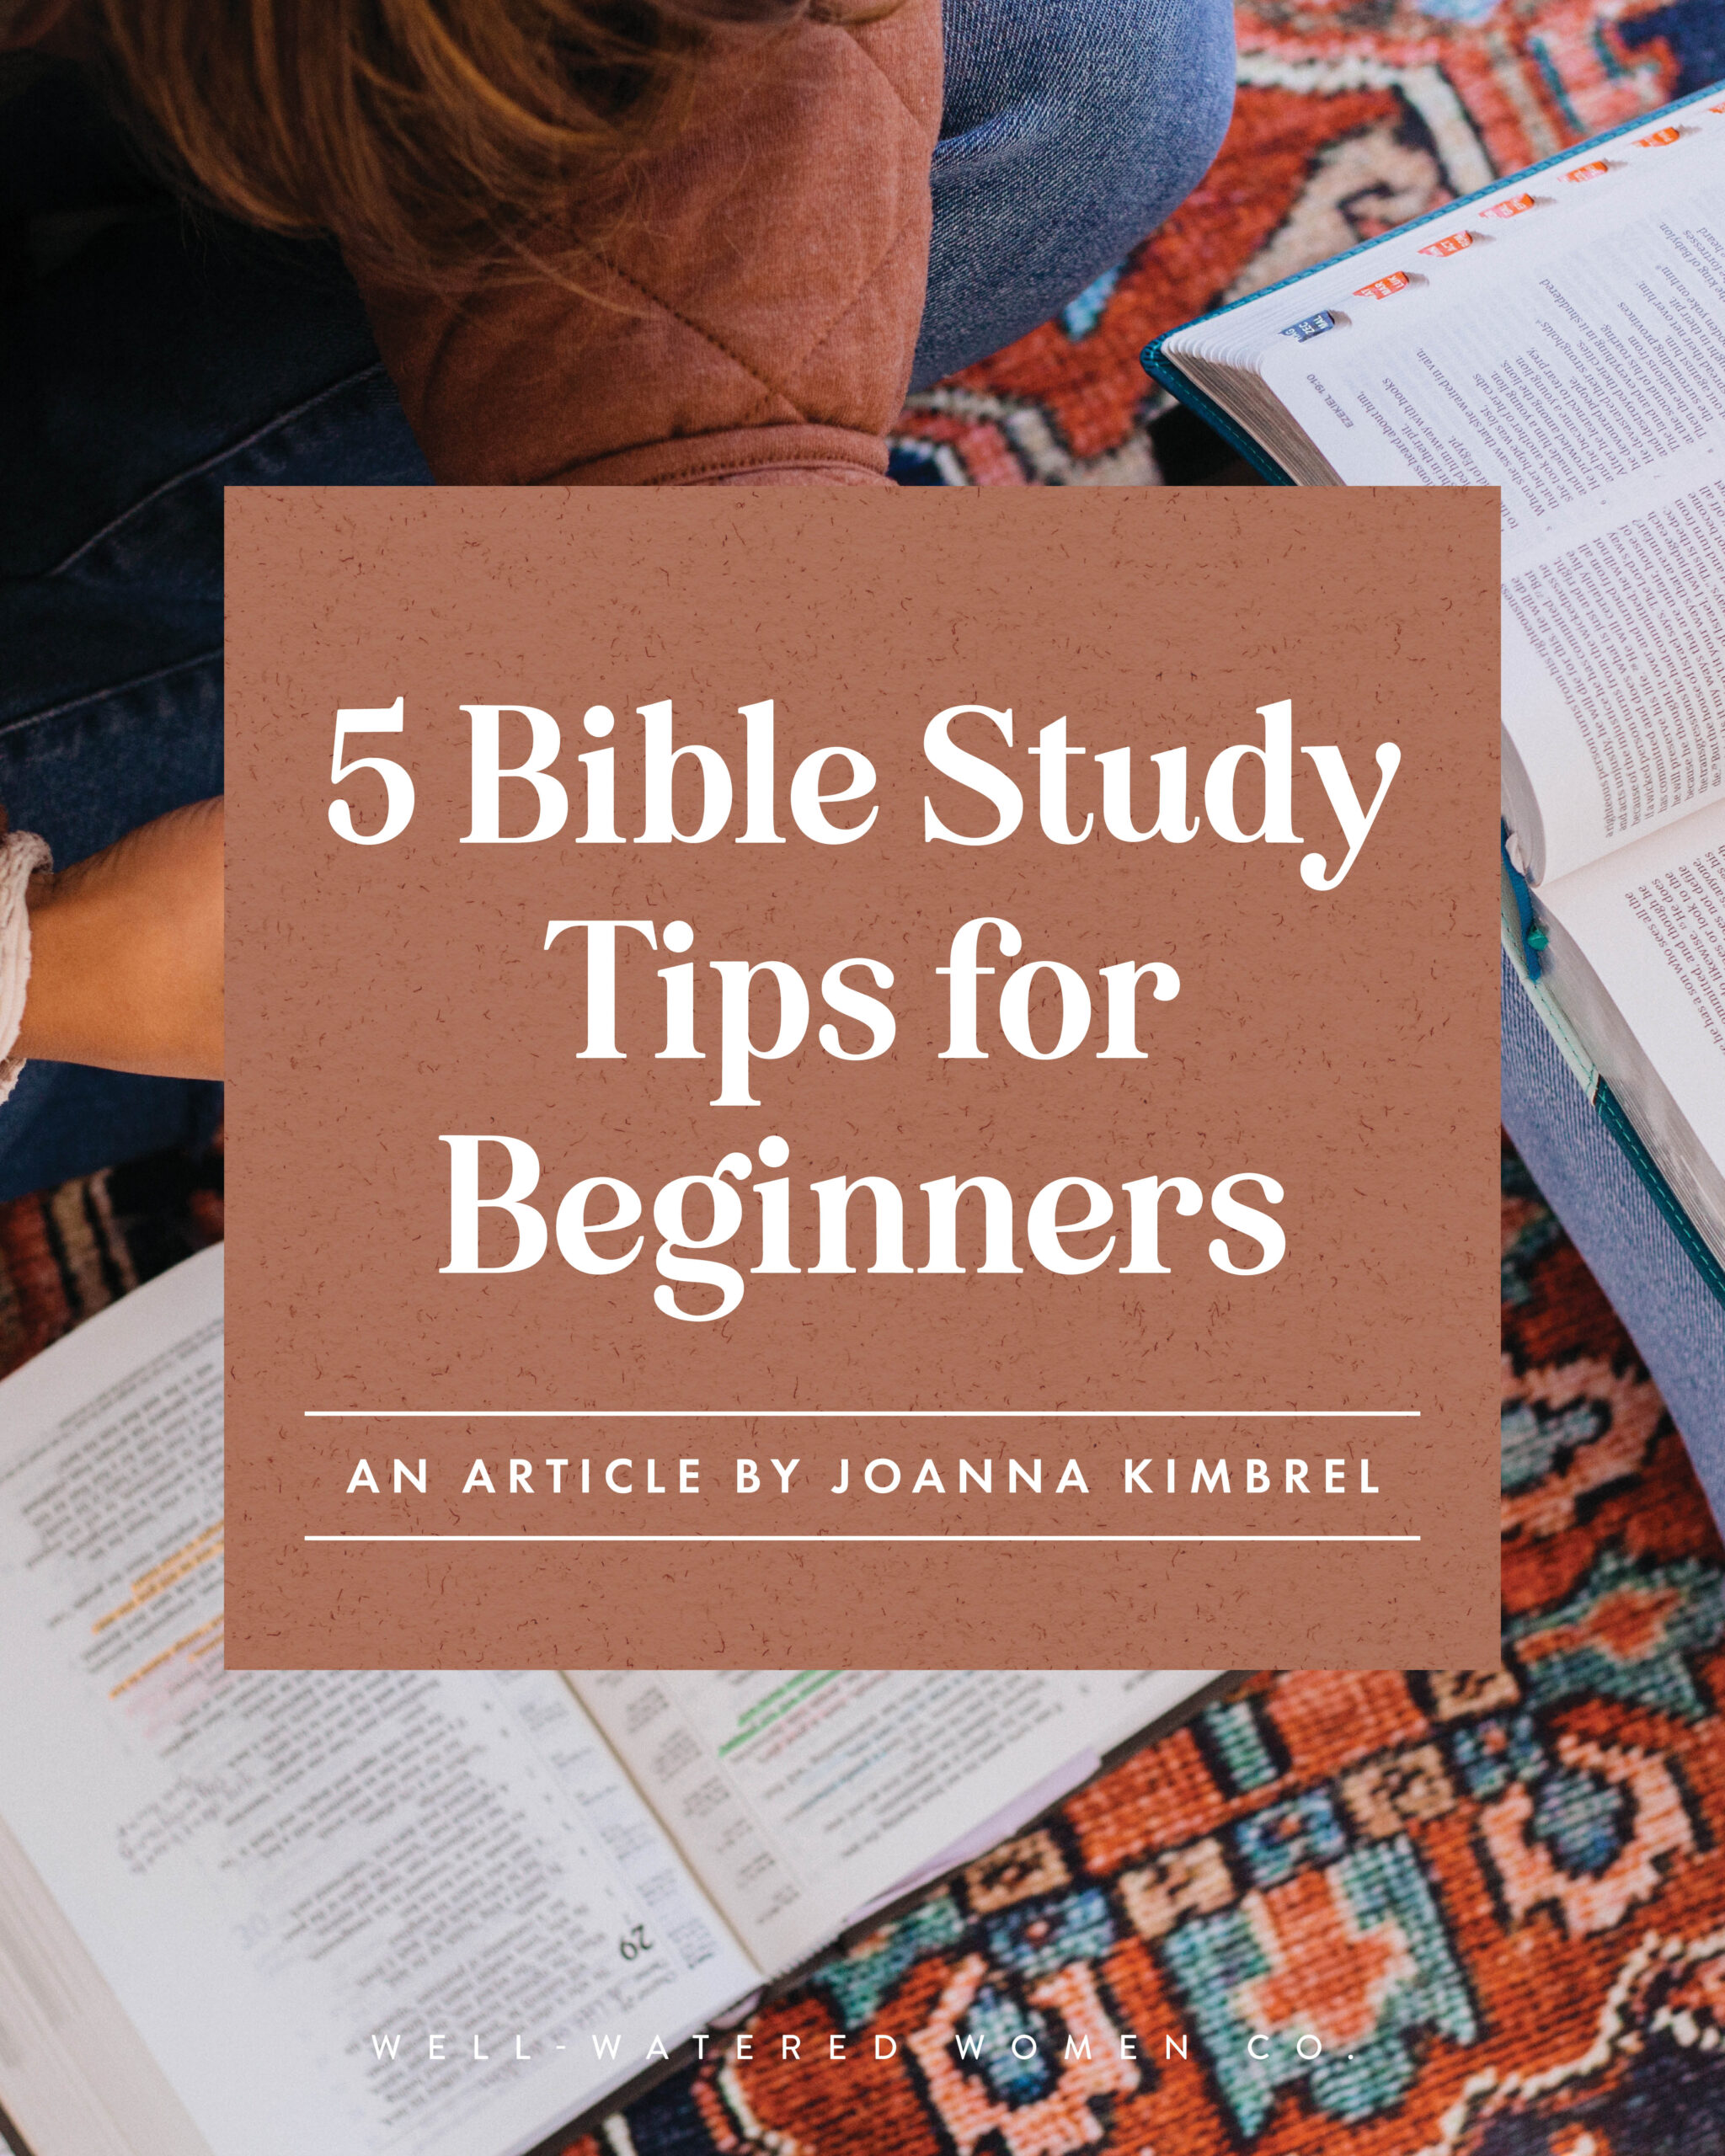 5 Bible Study Tips for Beginners - an article from Well-Watered Women